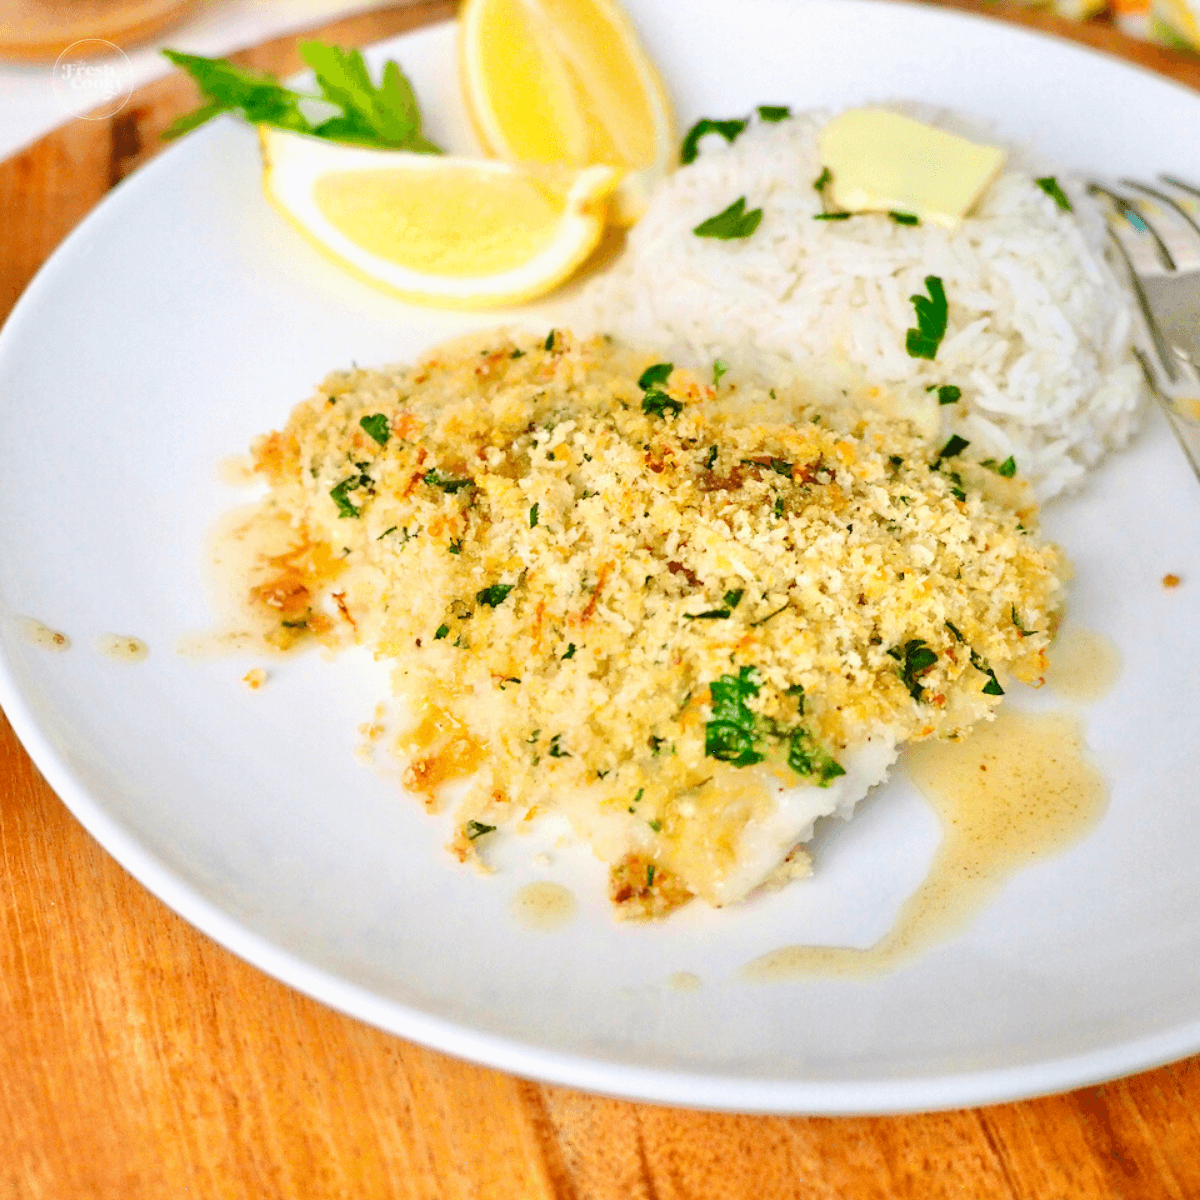 Panko Parmesan Baked Cod recipe plated with a drizzle of lemon garlic butter and a mound of fragrant basmati rice.